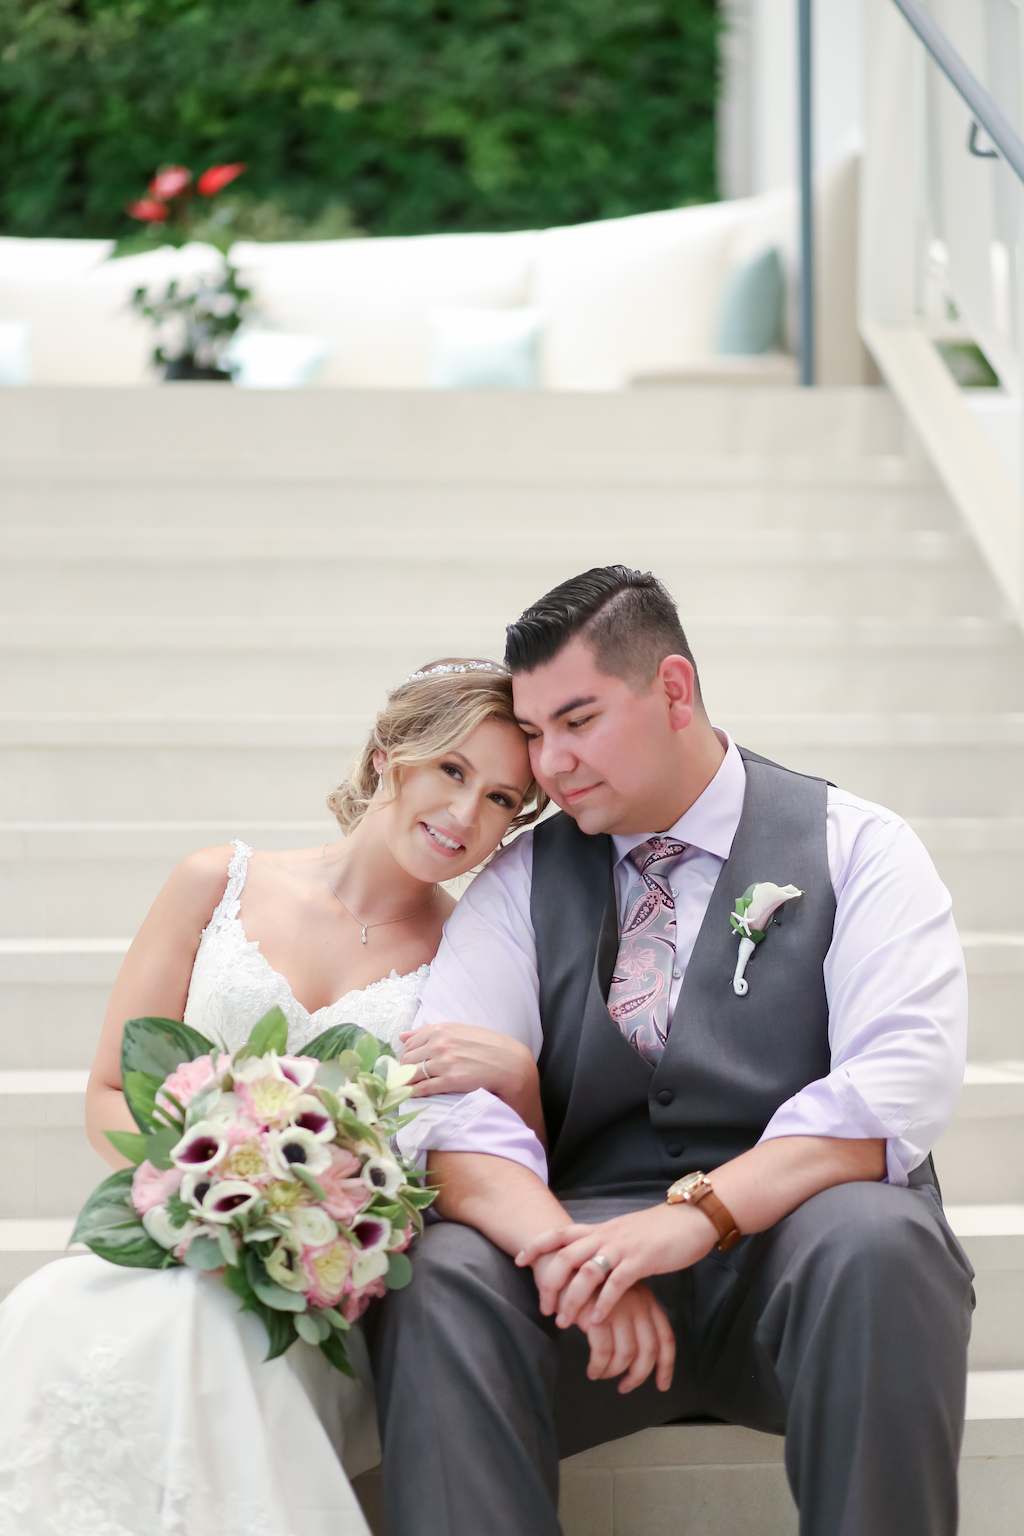 Outdoor Staircase Bride and Groom Wedding Portrain, Bride in Tank Top Lace and V Neckline Wedding Dress, White, Pink and Green Palm Leave Floral Bouquet, Groom in Grey Tuxedo Vest, Paisley Print Tie | Tampa Bay Wedding Photographer Lifelong Photography Studios | Wedding Venue Hilton Clearwater Beach